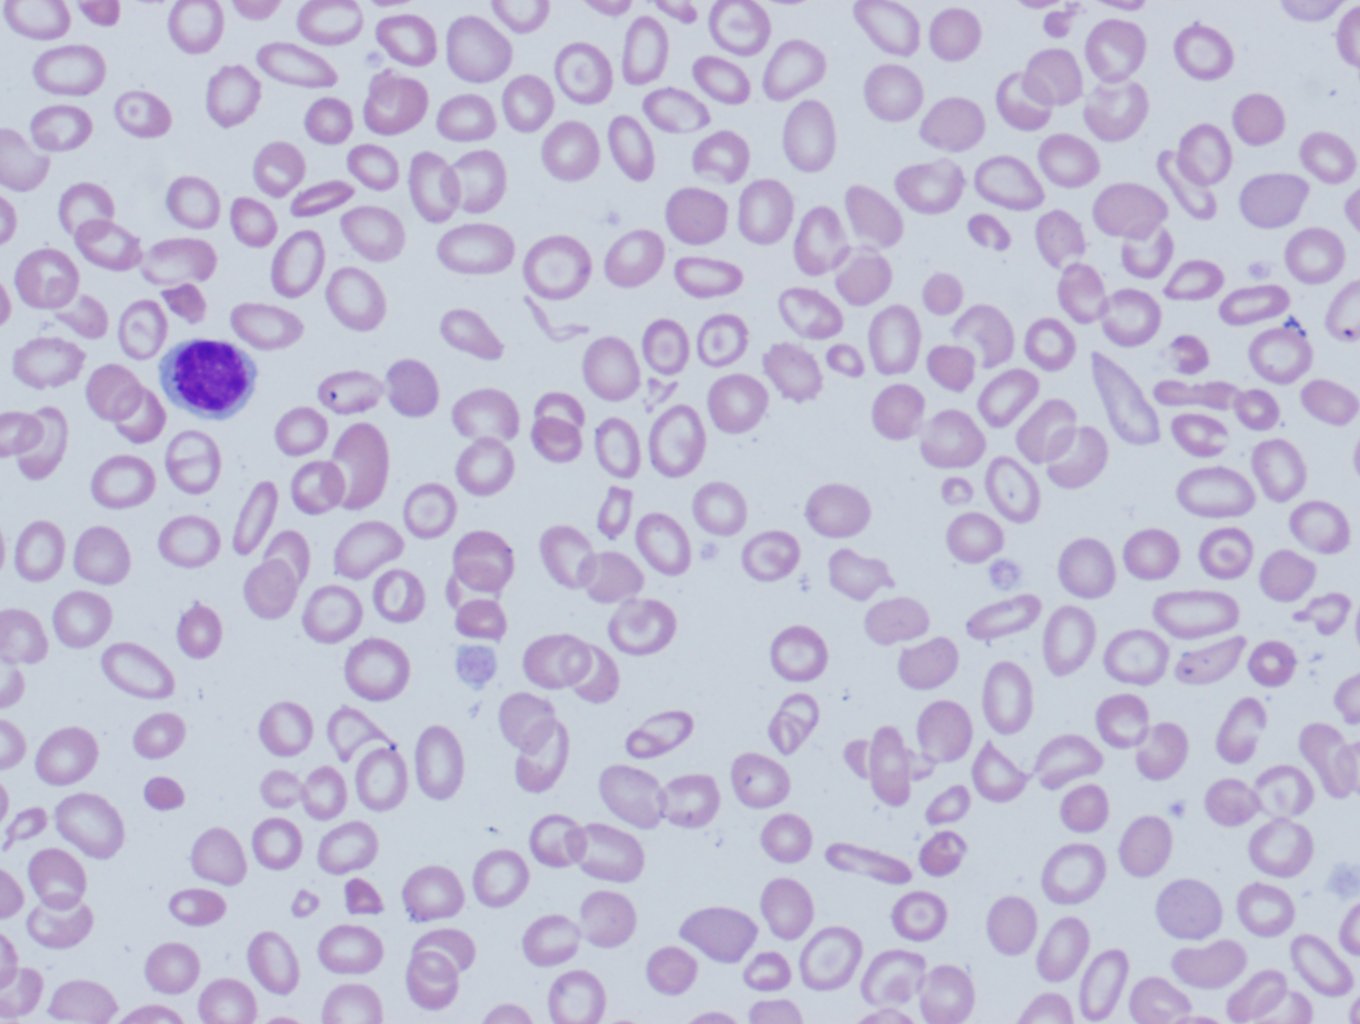 Peripheral blood with features of beta-thalassemia minor. Microcytosis and frequent target cells are characteristic.